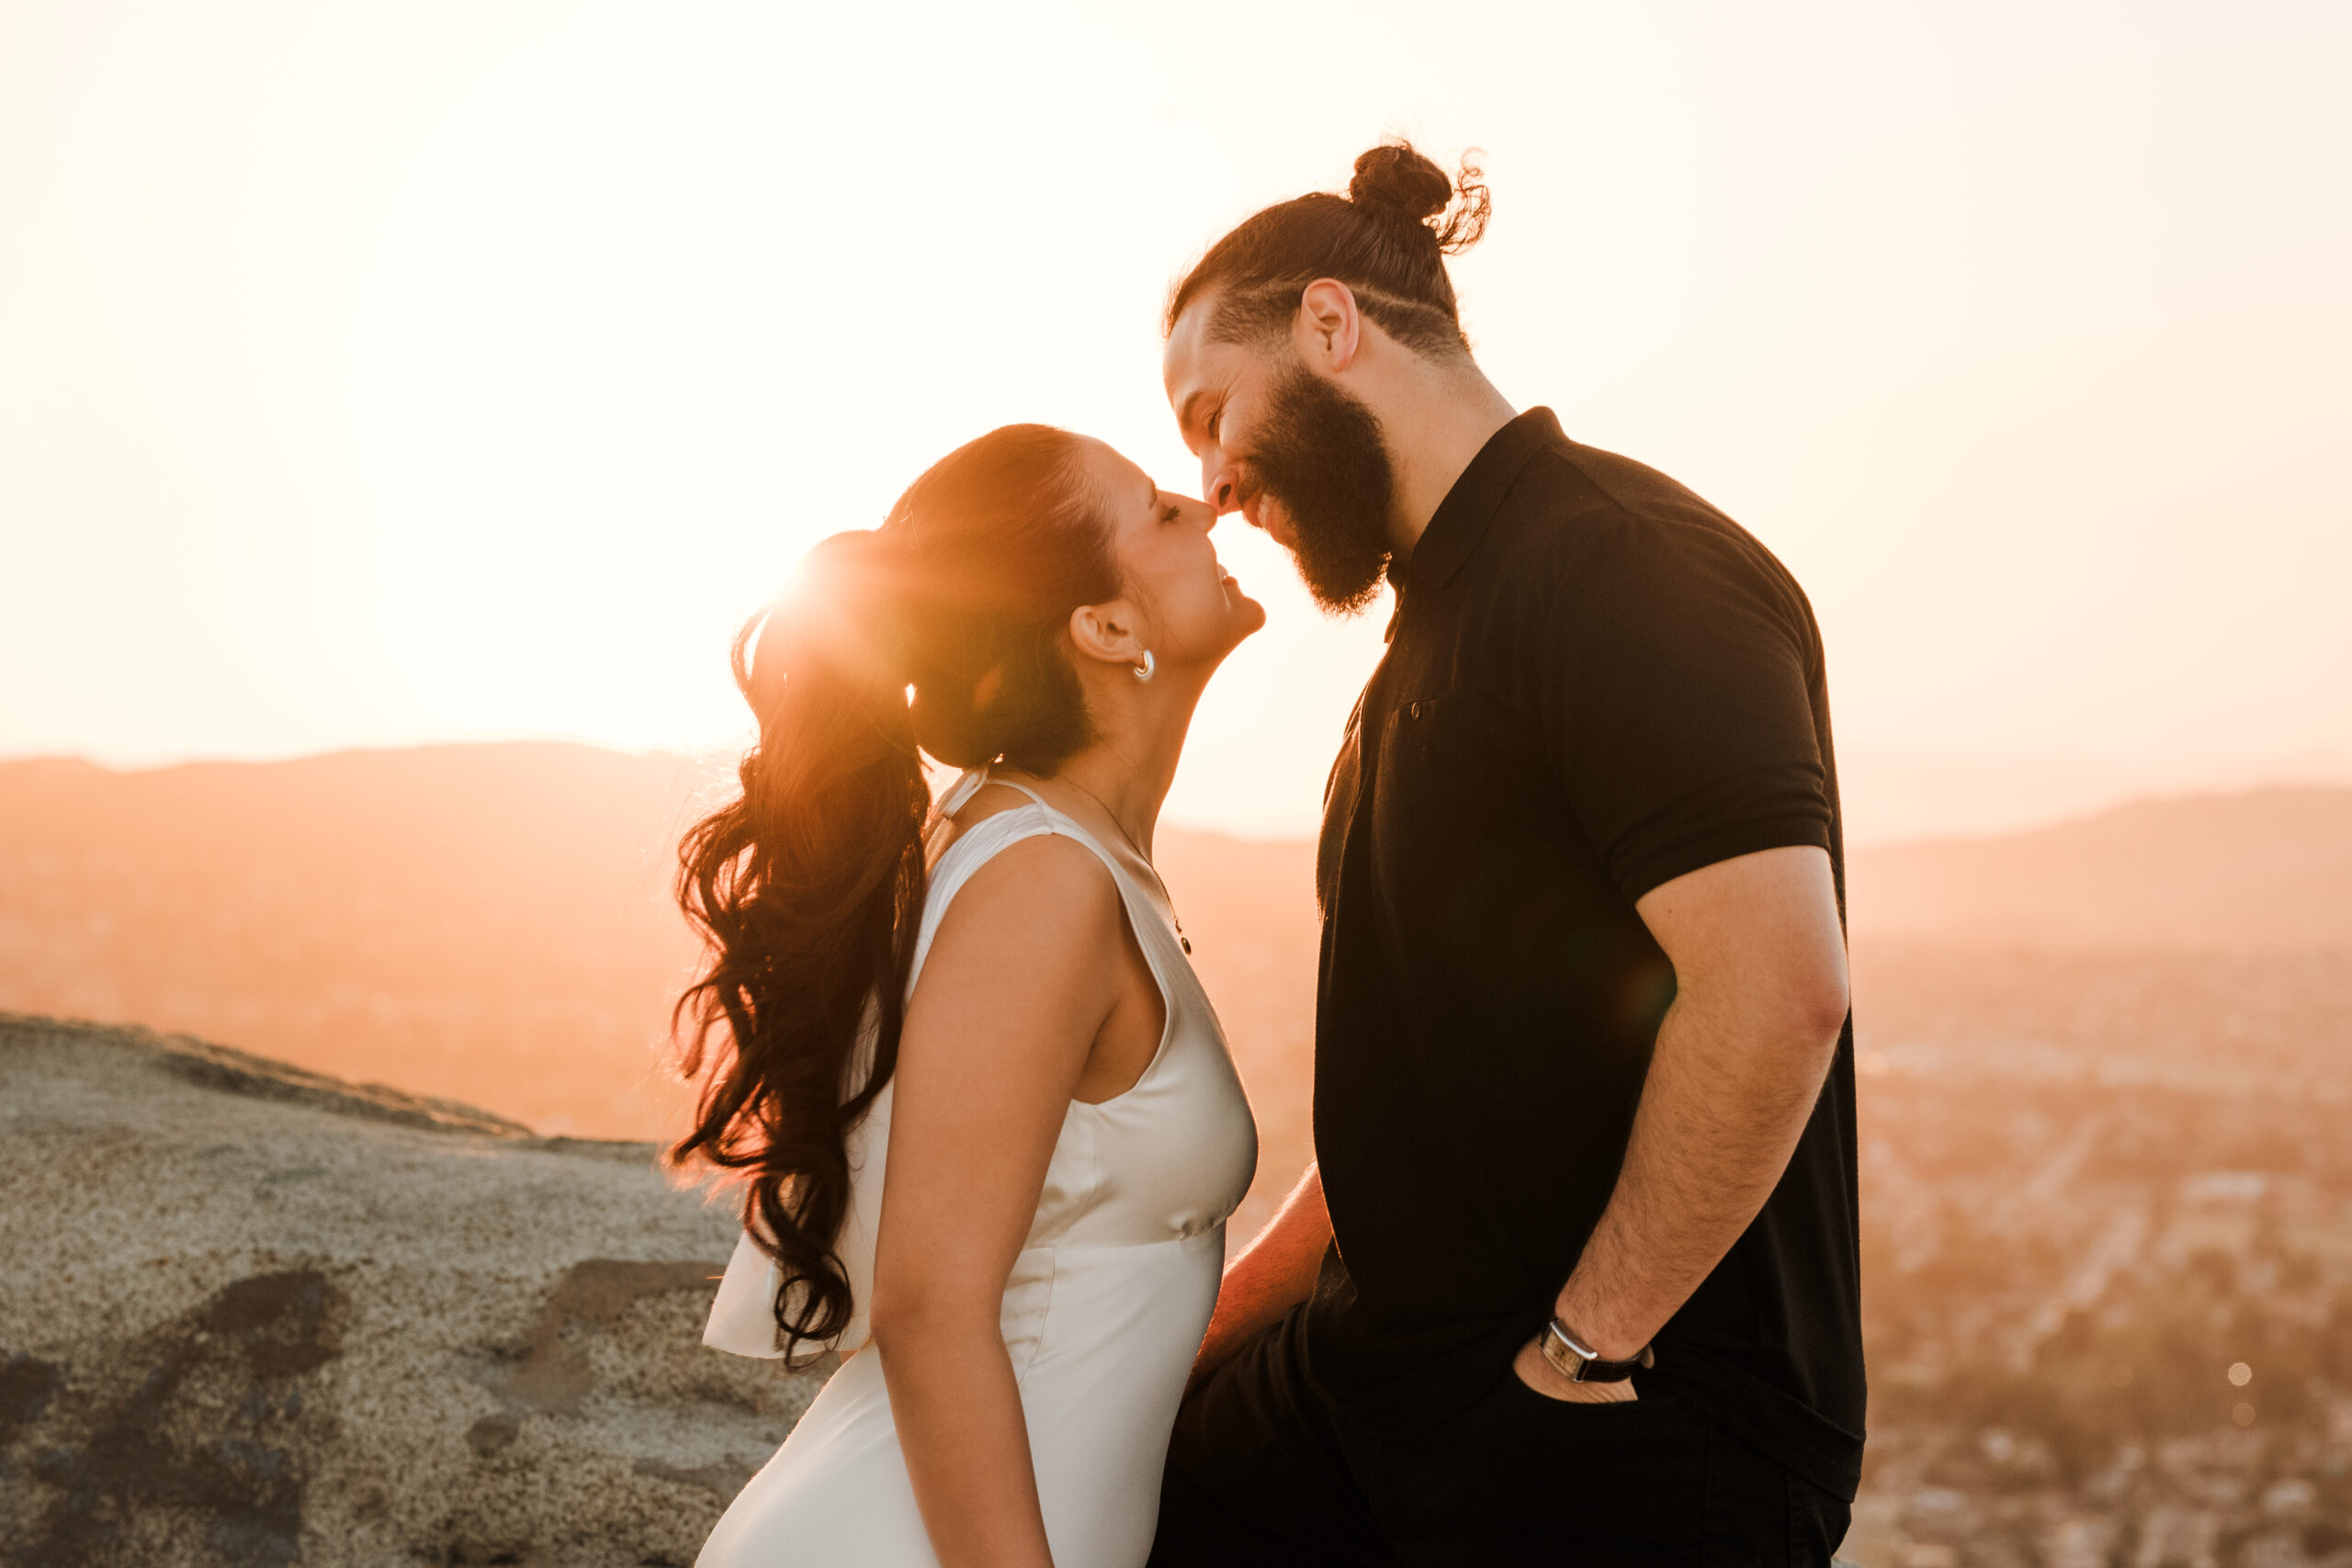 Engagement session during sunset on top of Mount Rubideaux over looking riverside county